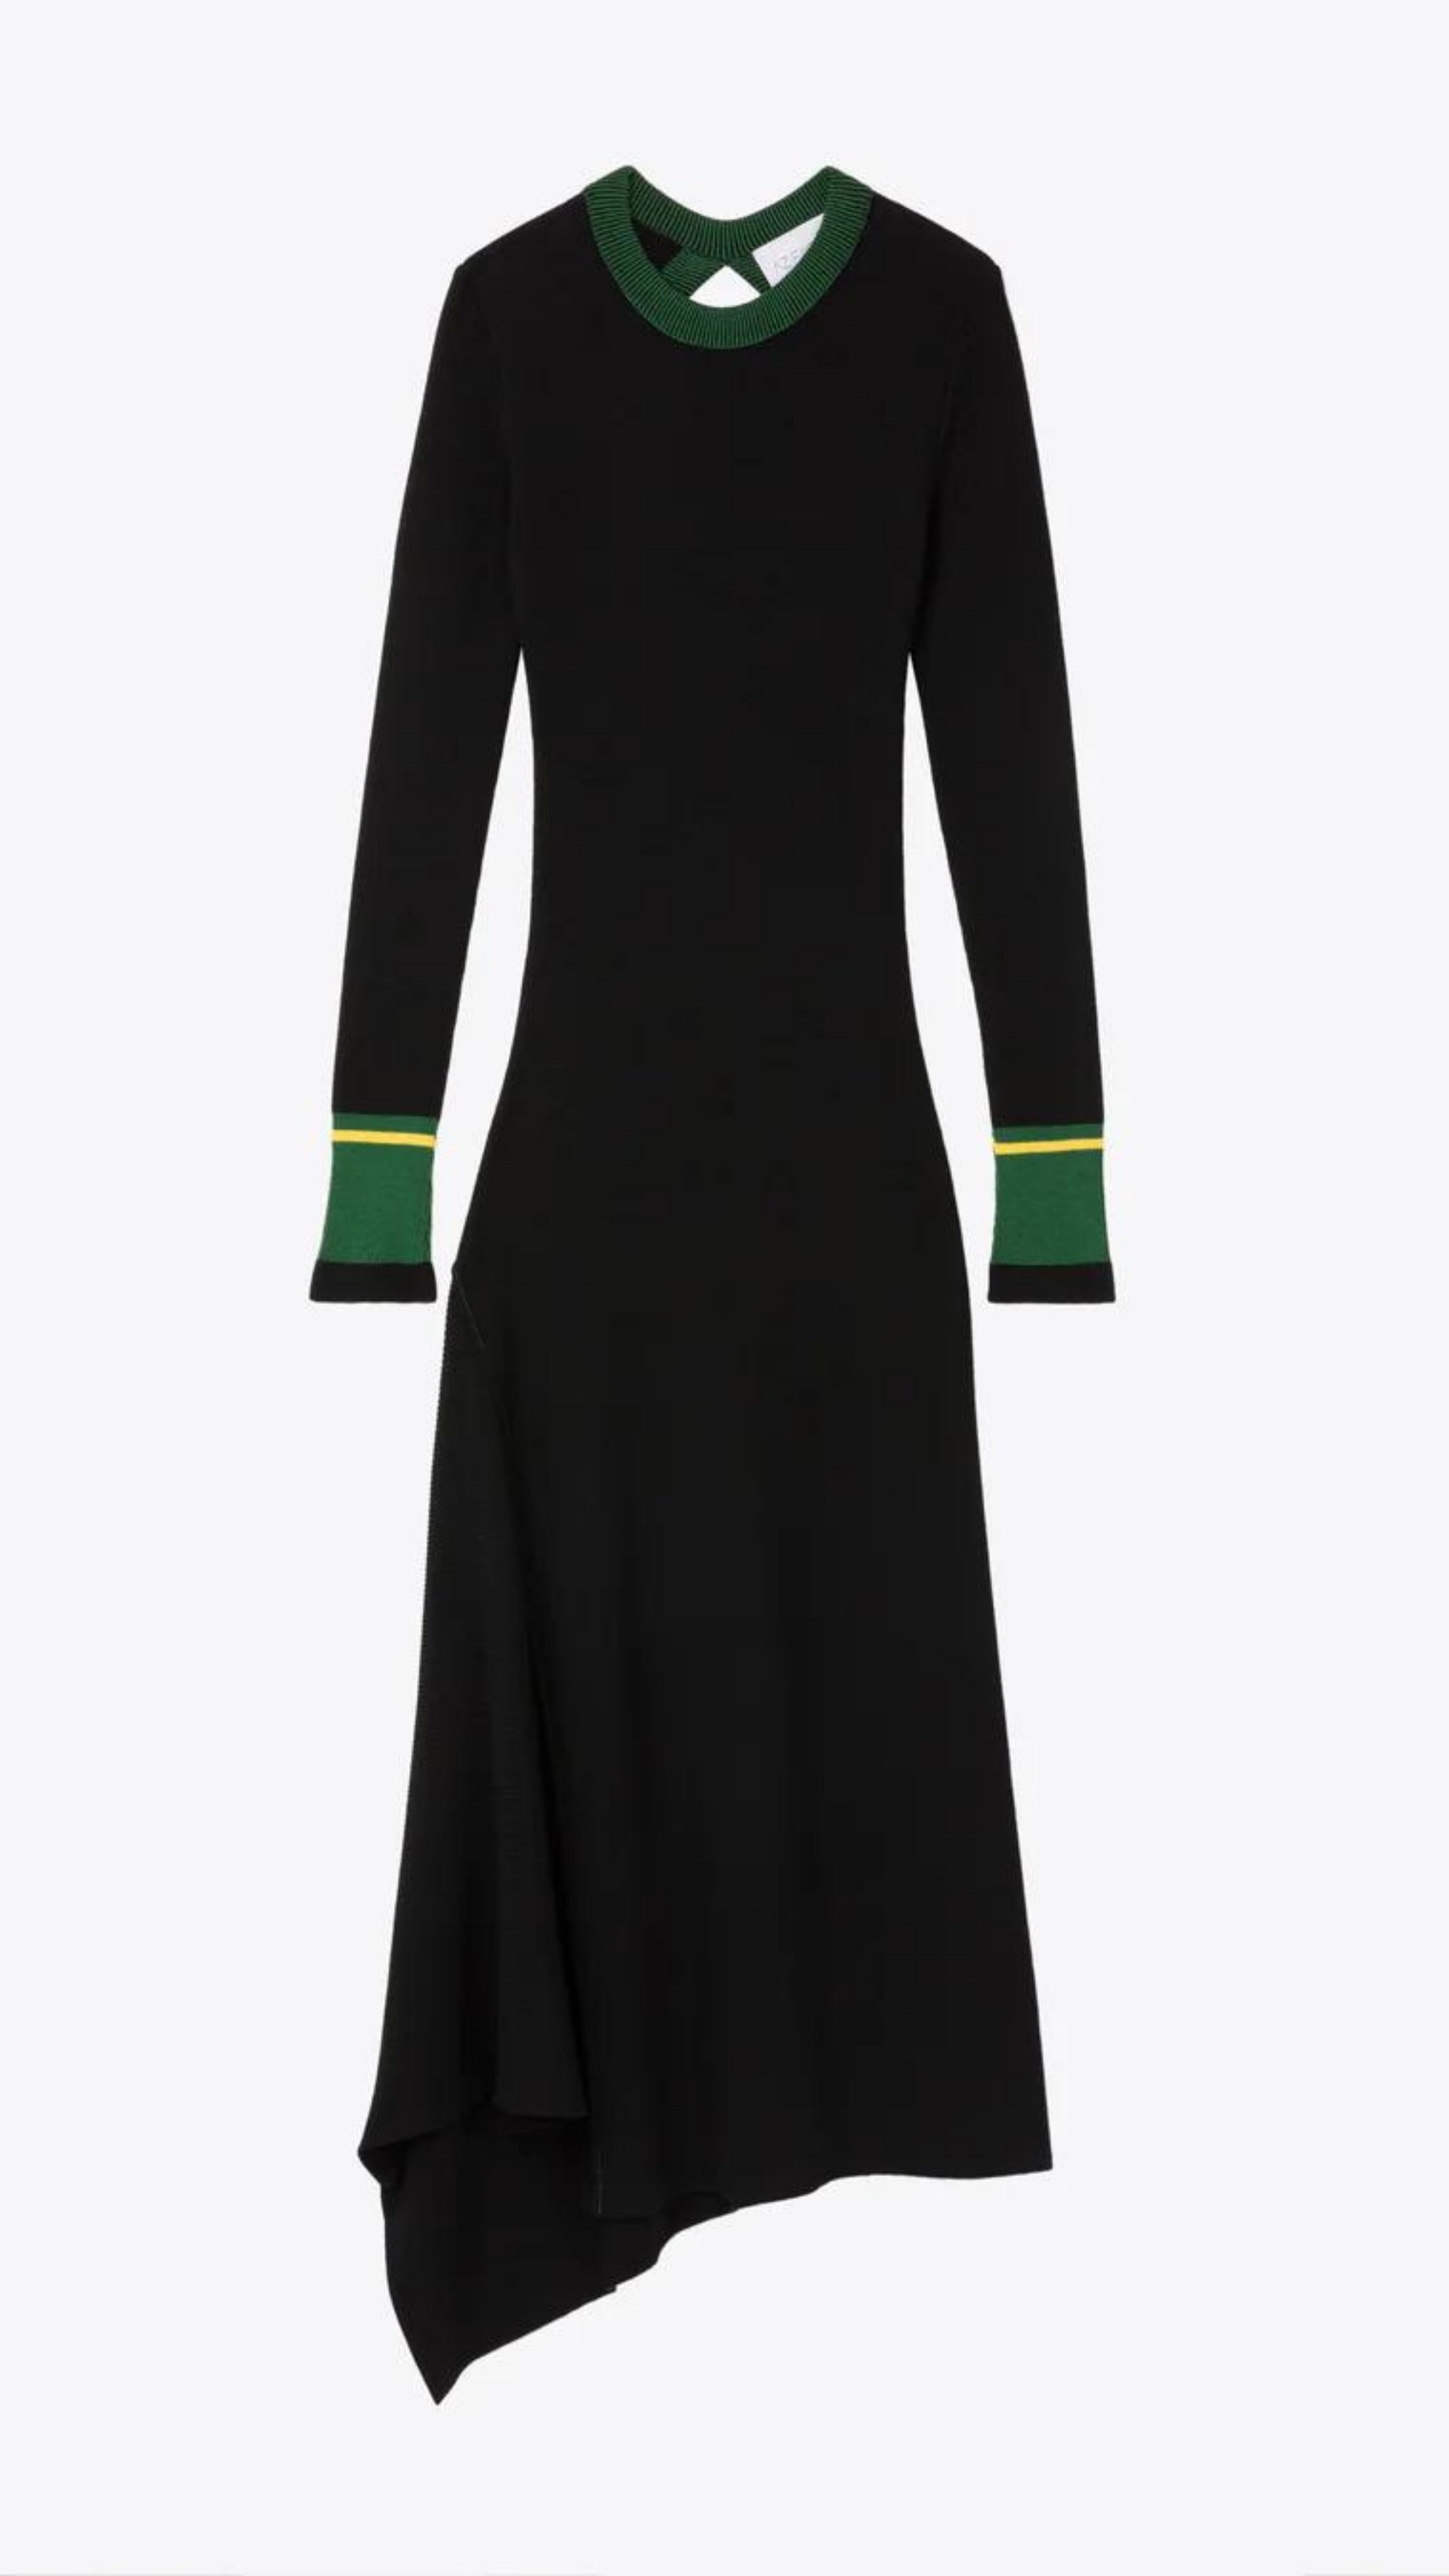 AZ Factory Colville Molly Molloy and Lucina Chambers Back Keyhole Asymmetrical Dress. Knit dress in black with a key hole cut out in the back. The neckline and the cuffs are rimmed in green and yellow. Asymmetrical long hem. Product photo facing front.